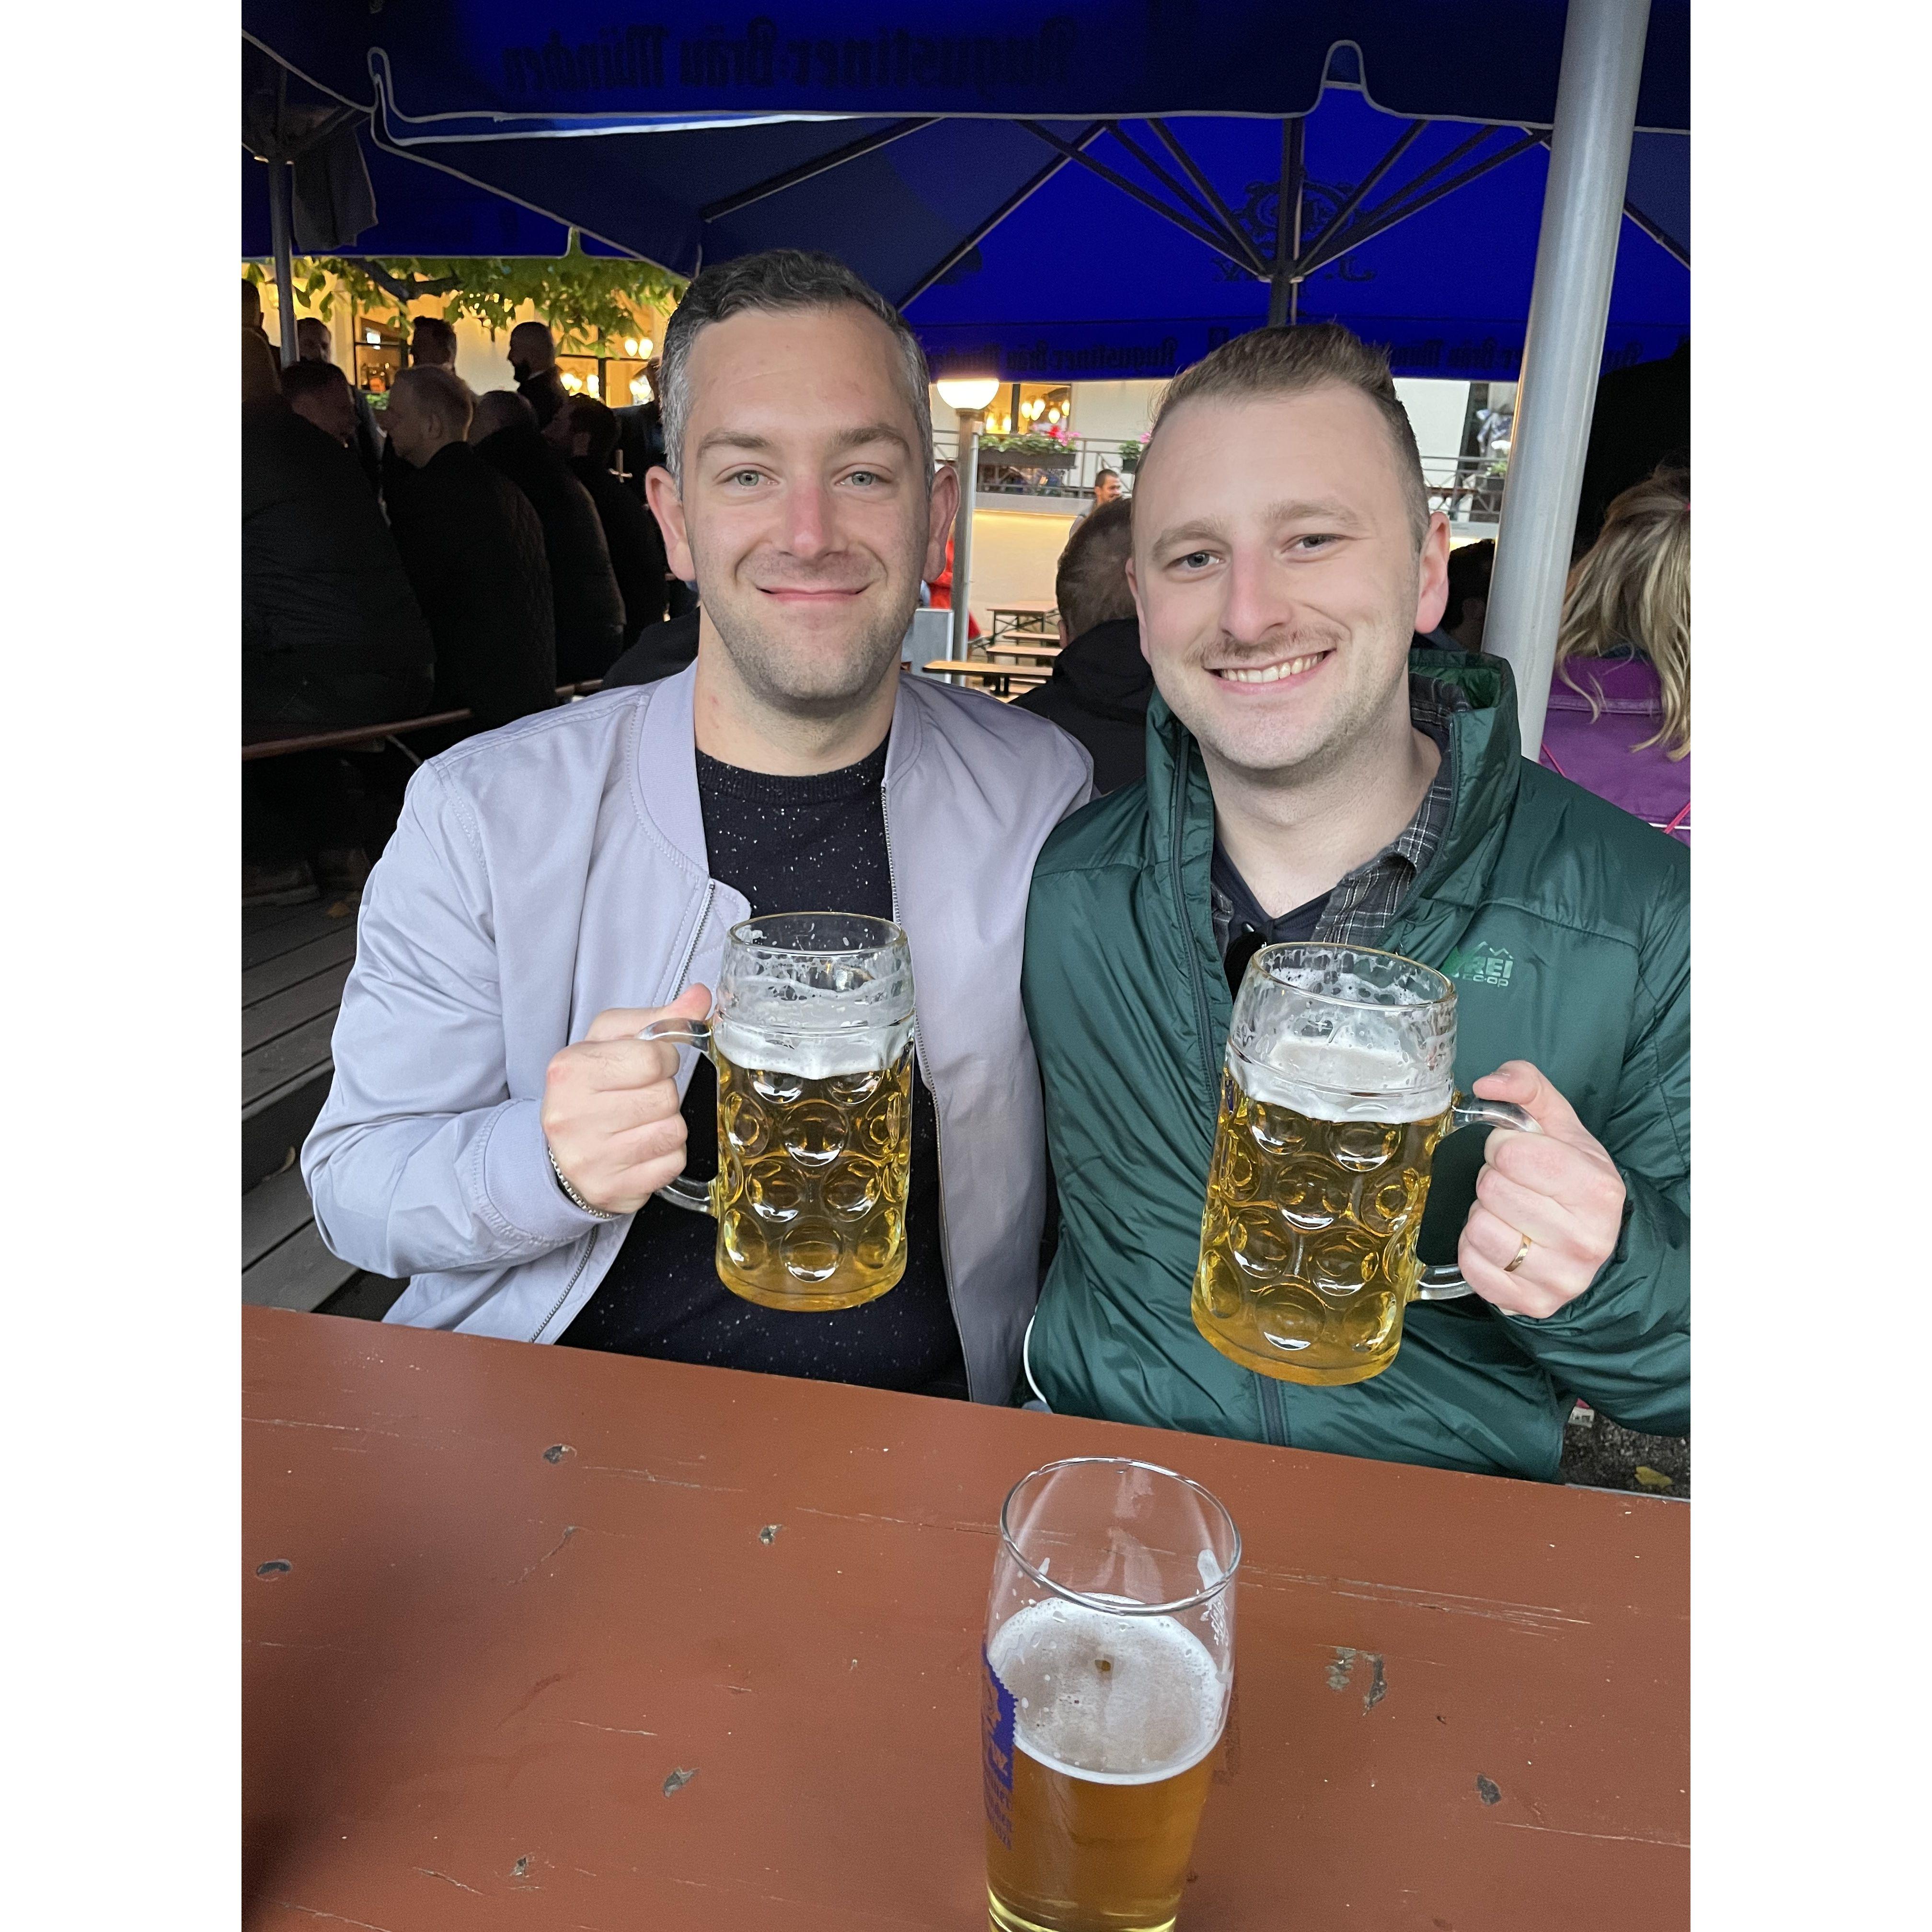 September 2021
Our most recent trip to Berlin, a city we love to return to!